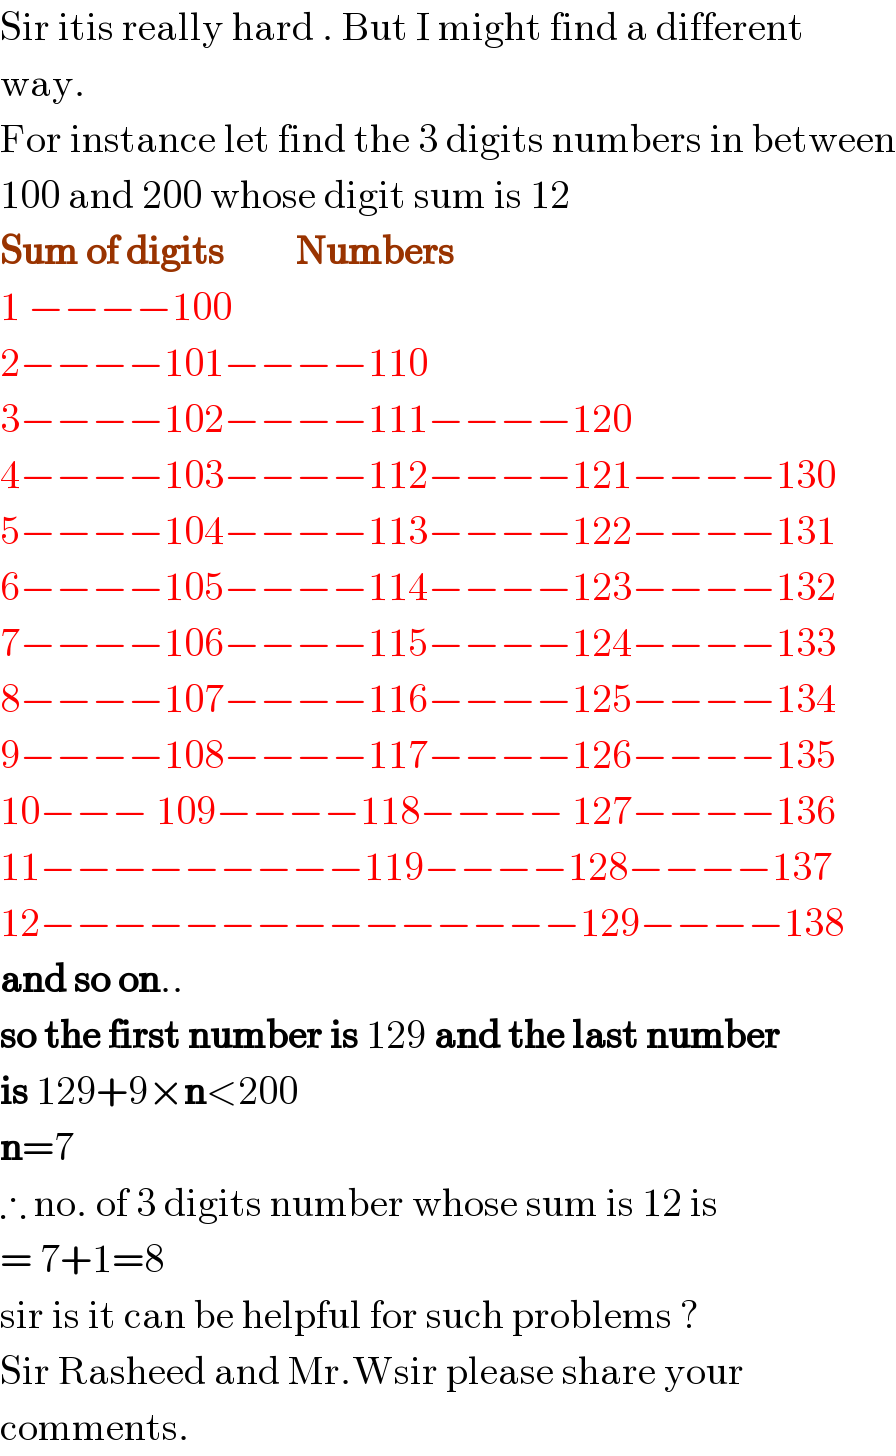 Sir itis really hard . But I might find a different  way.  For instance let find the 3 digits numbers in between  100 and 200 whose digit sum is 12   Sum of digits         Numbers  1 −−−−100  2−−−−101−−−−110  3−−−−102−−−−111−−−−120  4−−−−103−−−−112−−−−121−−−−130  5−−−−104−−−−113−−−−122−−−−131  6−−−−105−−−−114−−−−123−−−−132  7−−−−106−−−−115−−−−124−−−−133  8−−−−107−−−−116−−−−125−−−−134  9−−−−108−−−−117−−−−126−−−−135  10−−− 109−−−−118−−−− 127−−−−136  11−−−−−−−−−119−−−−128−−−−137  12−−−−−−−−−−−−−−−129−−−−138  and so on..  so the first number is 129 and the last number   is 129+9×n<200  n=7  ∴ no. of 3 digits number whose sum is 12 is  = 7+1=8  sir is it can be helpful for such problems ?  Sir Rasheed and Mr.Wsir please share your  comments.  